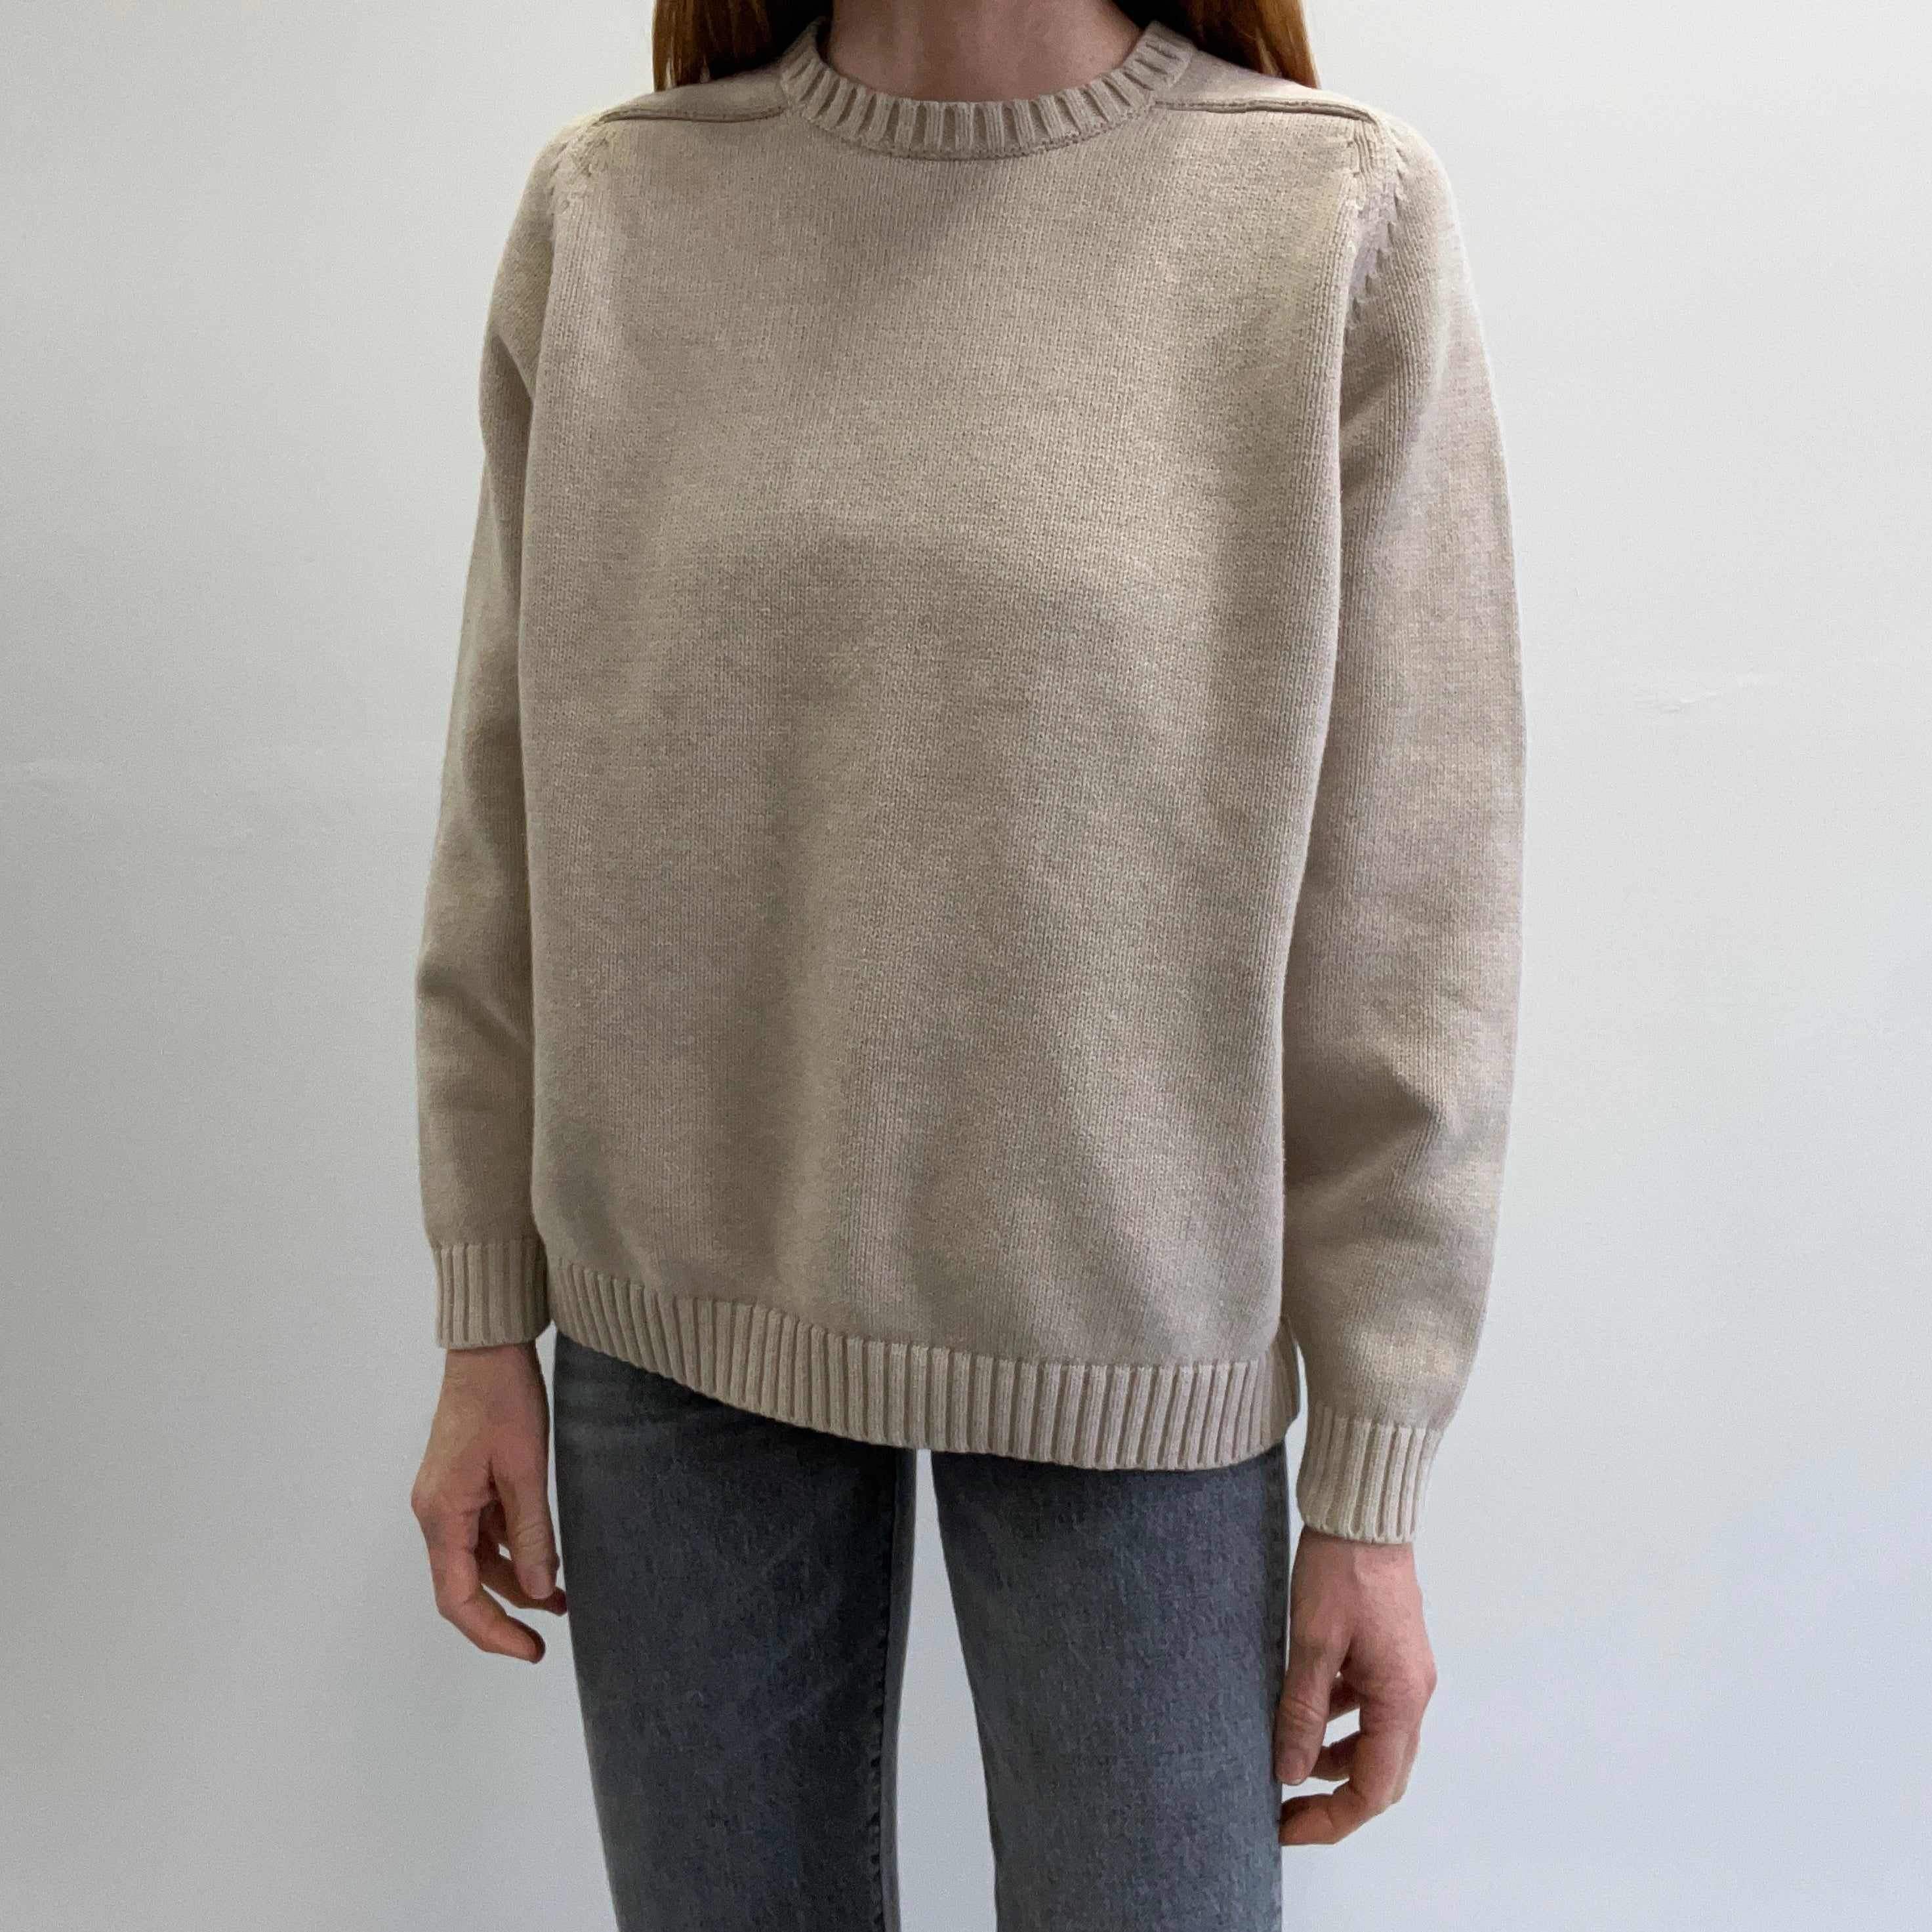 1990/2000s Lands' End Khaki Cotton Sweater - Made in Japan